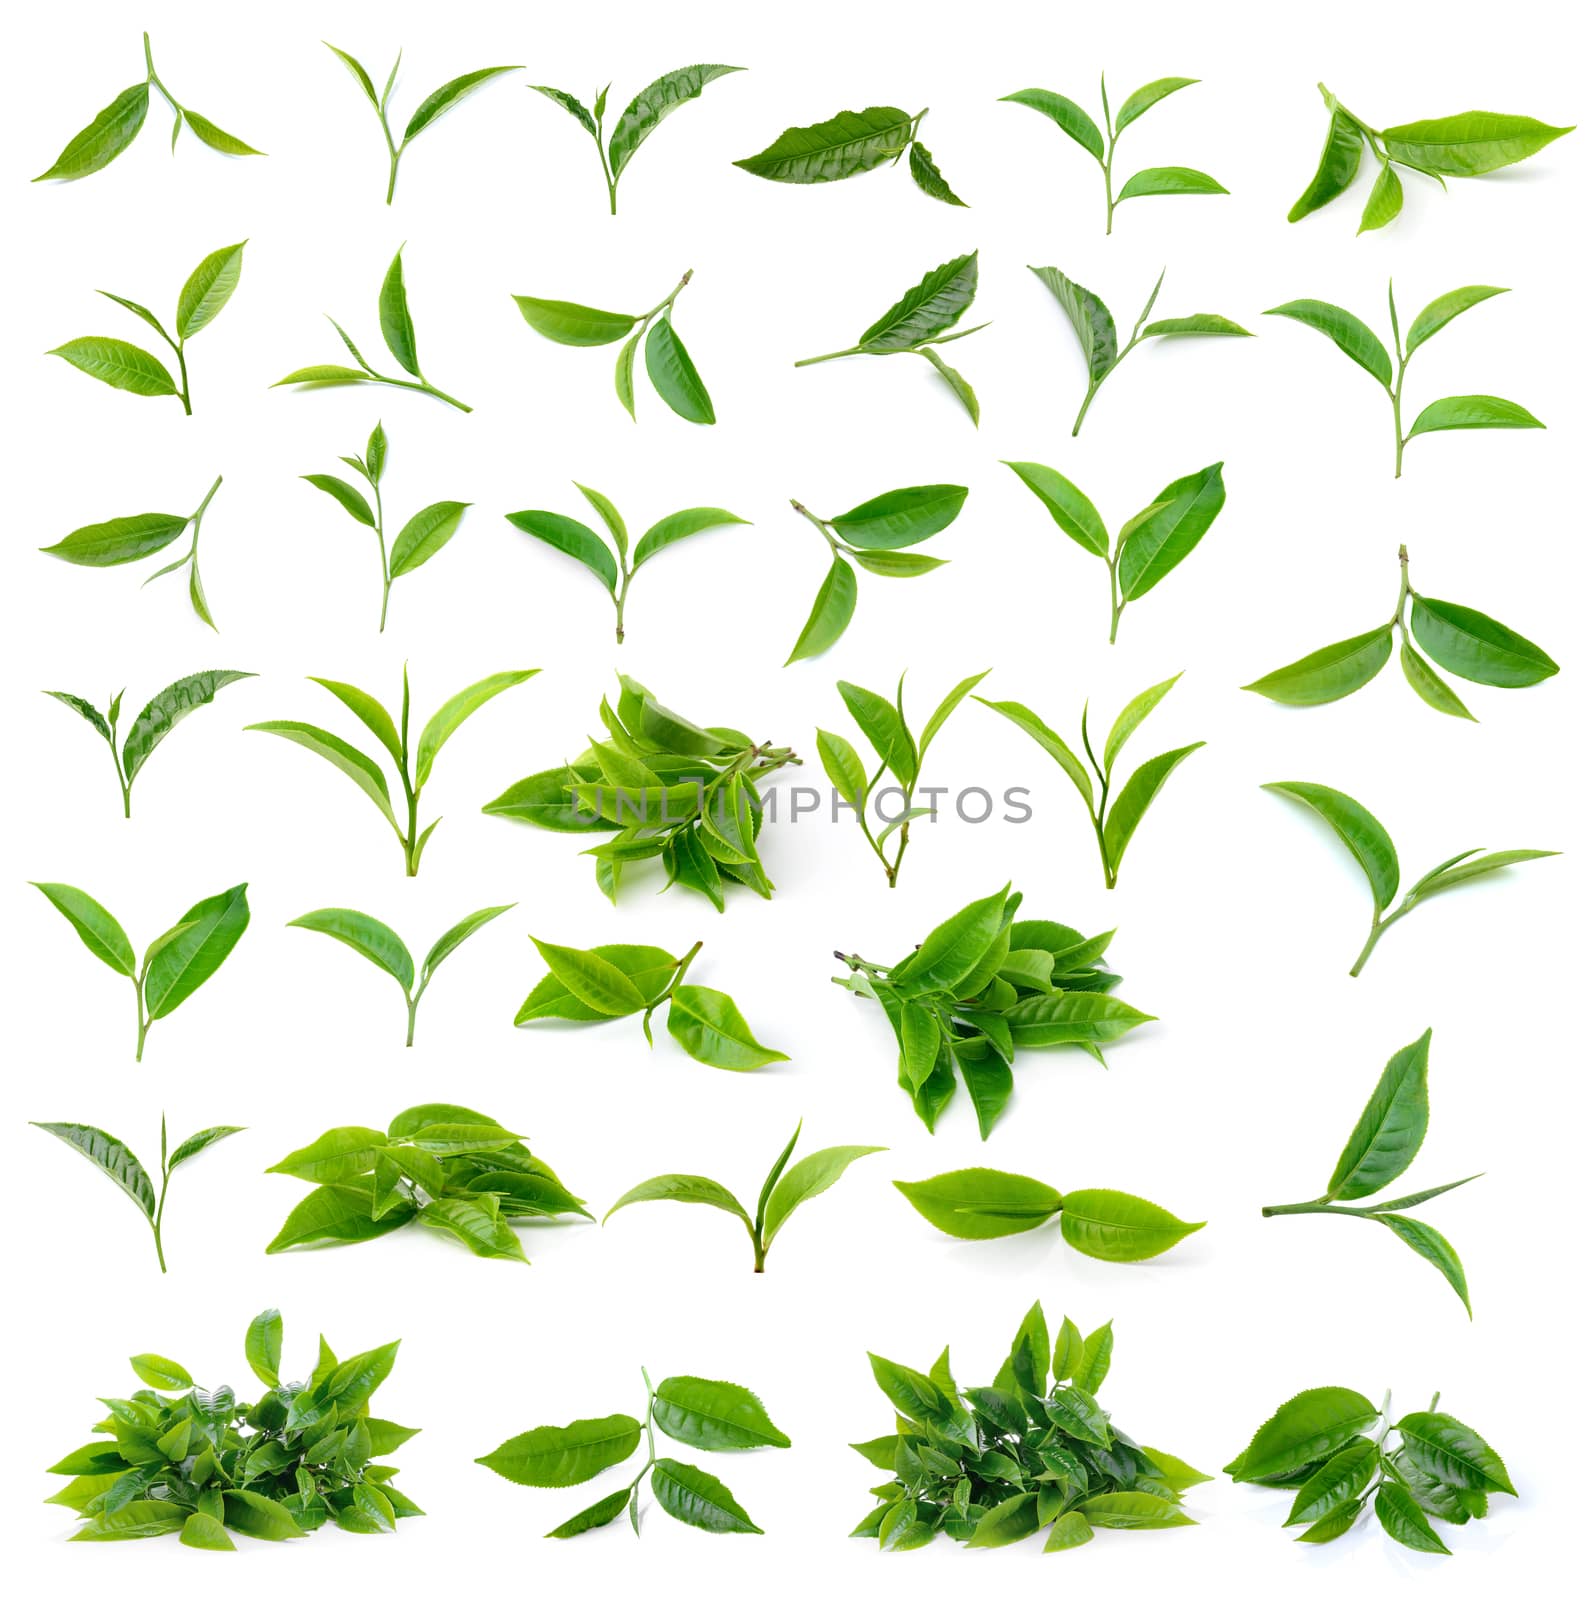 Green tea leaf isolated on white background by sommai